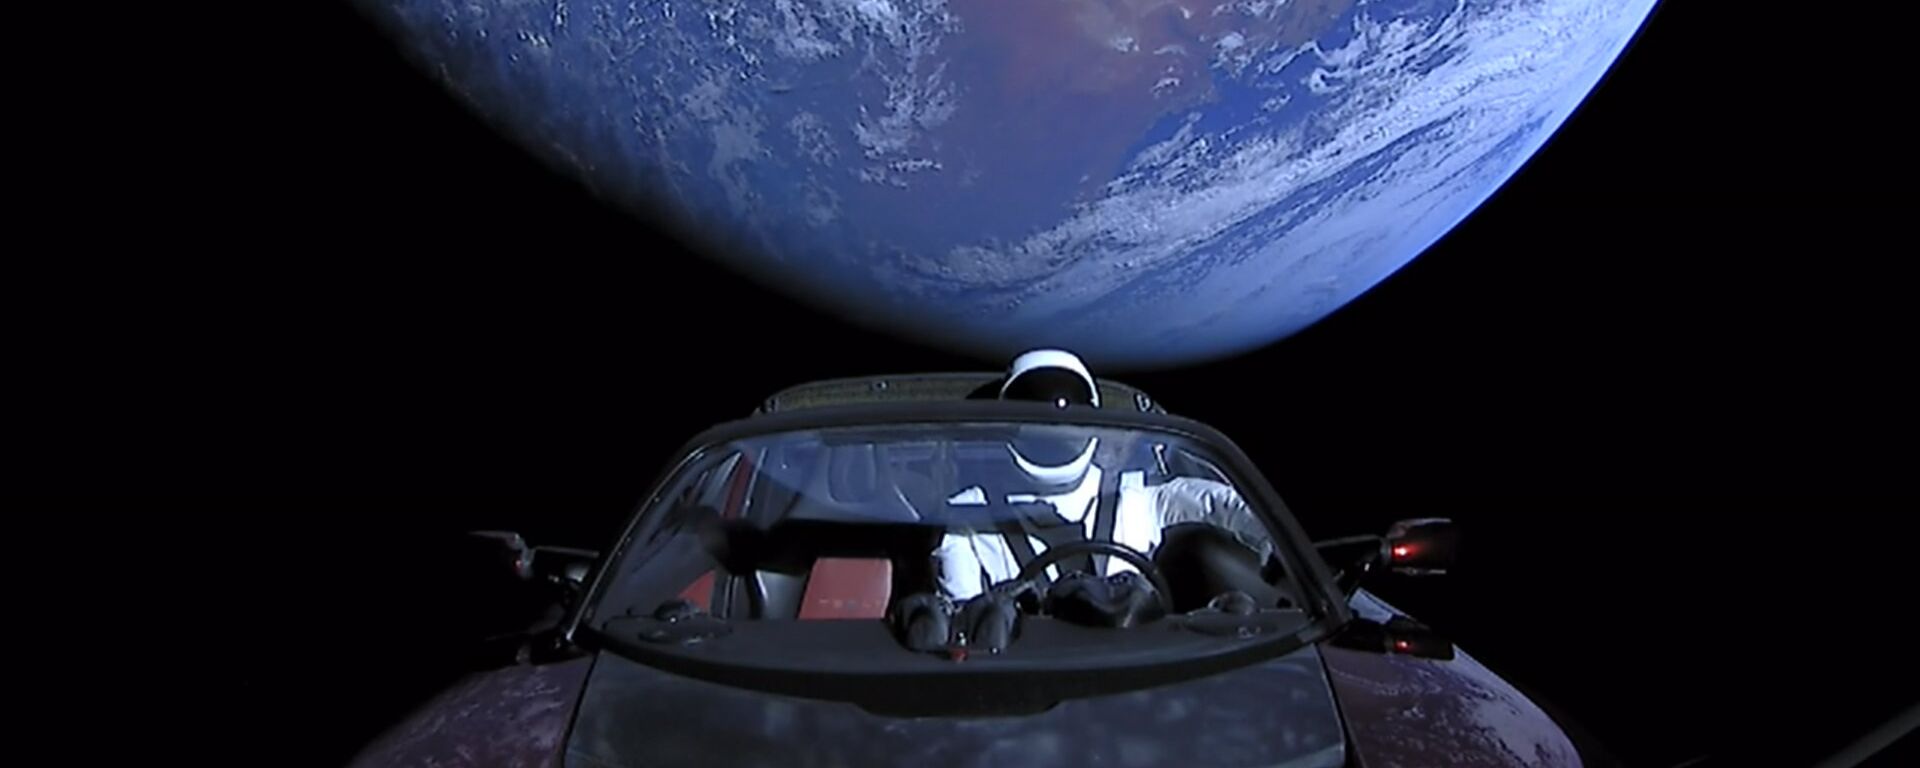 SpaceX CEO Elon Musk's own car, a red Tesla Roadster cabrio, entered into orbit via a Falcon Heavy launcher, with a dummy wearing a spacesuit at the steering wheel. - Sputnik International, 1920, 01.05.2023